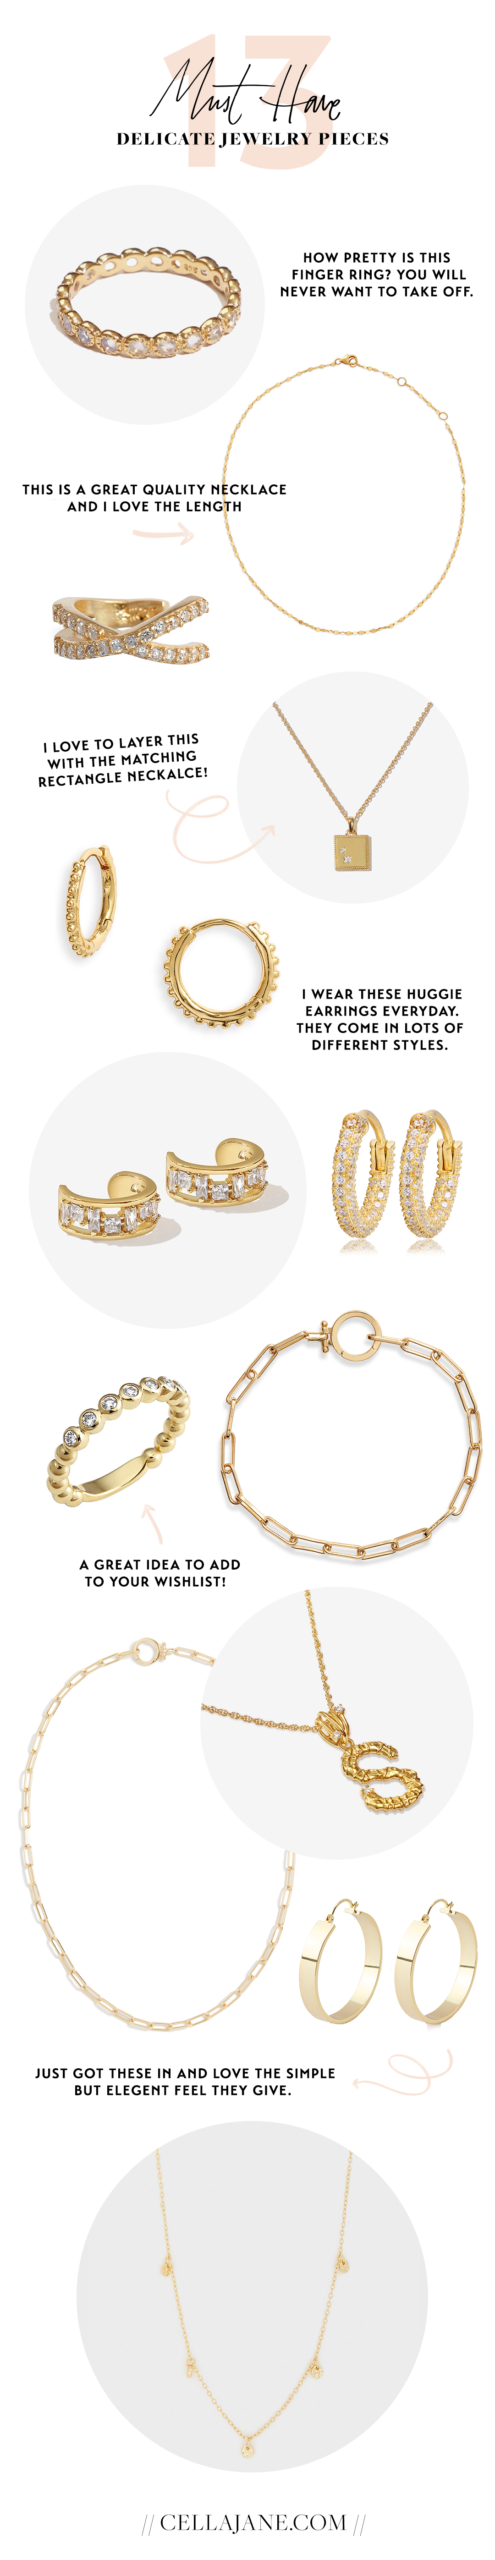 13 Delicate Jewelry Pieces to Buy Yourself this Holiday